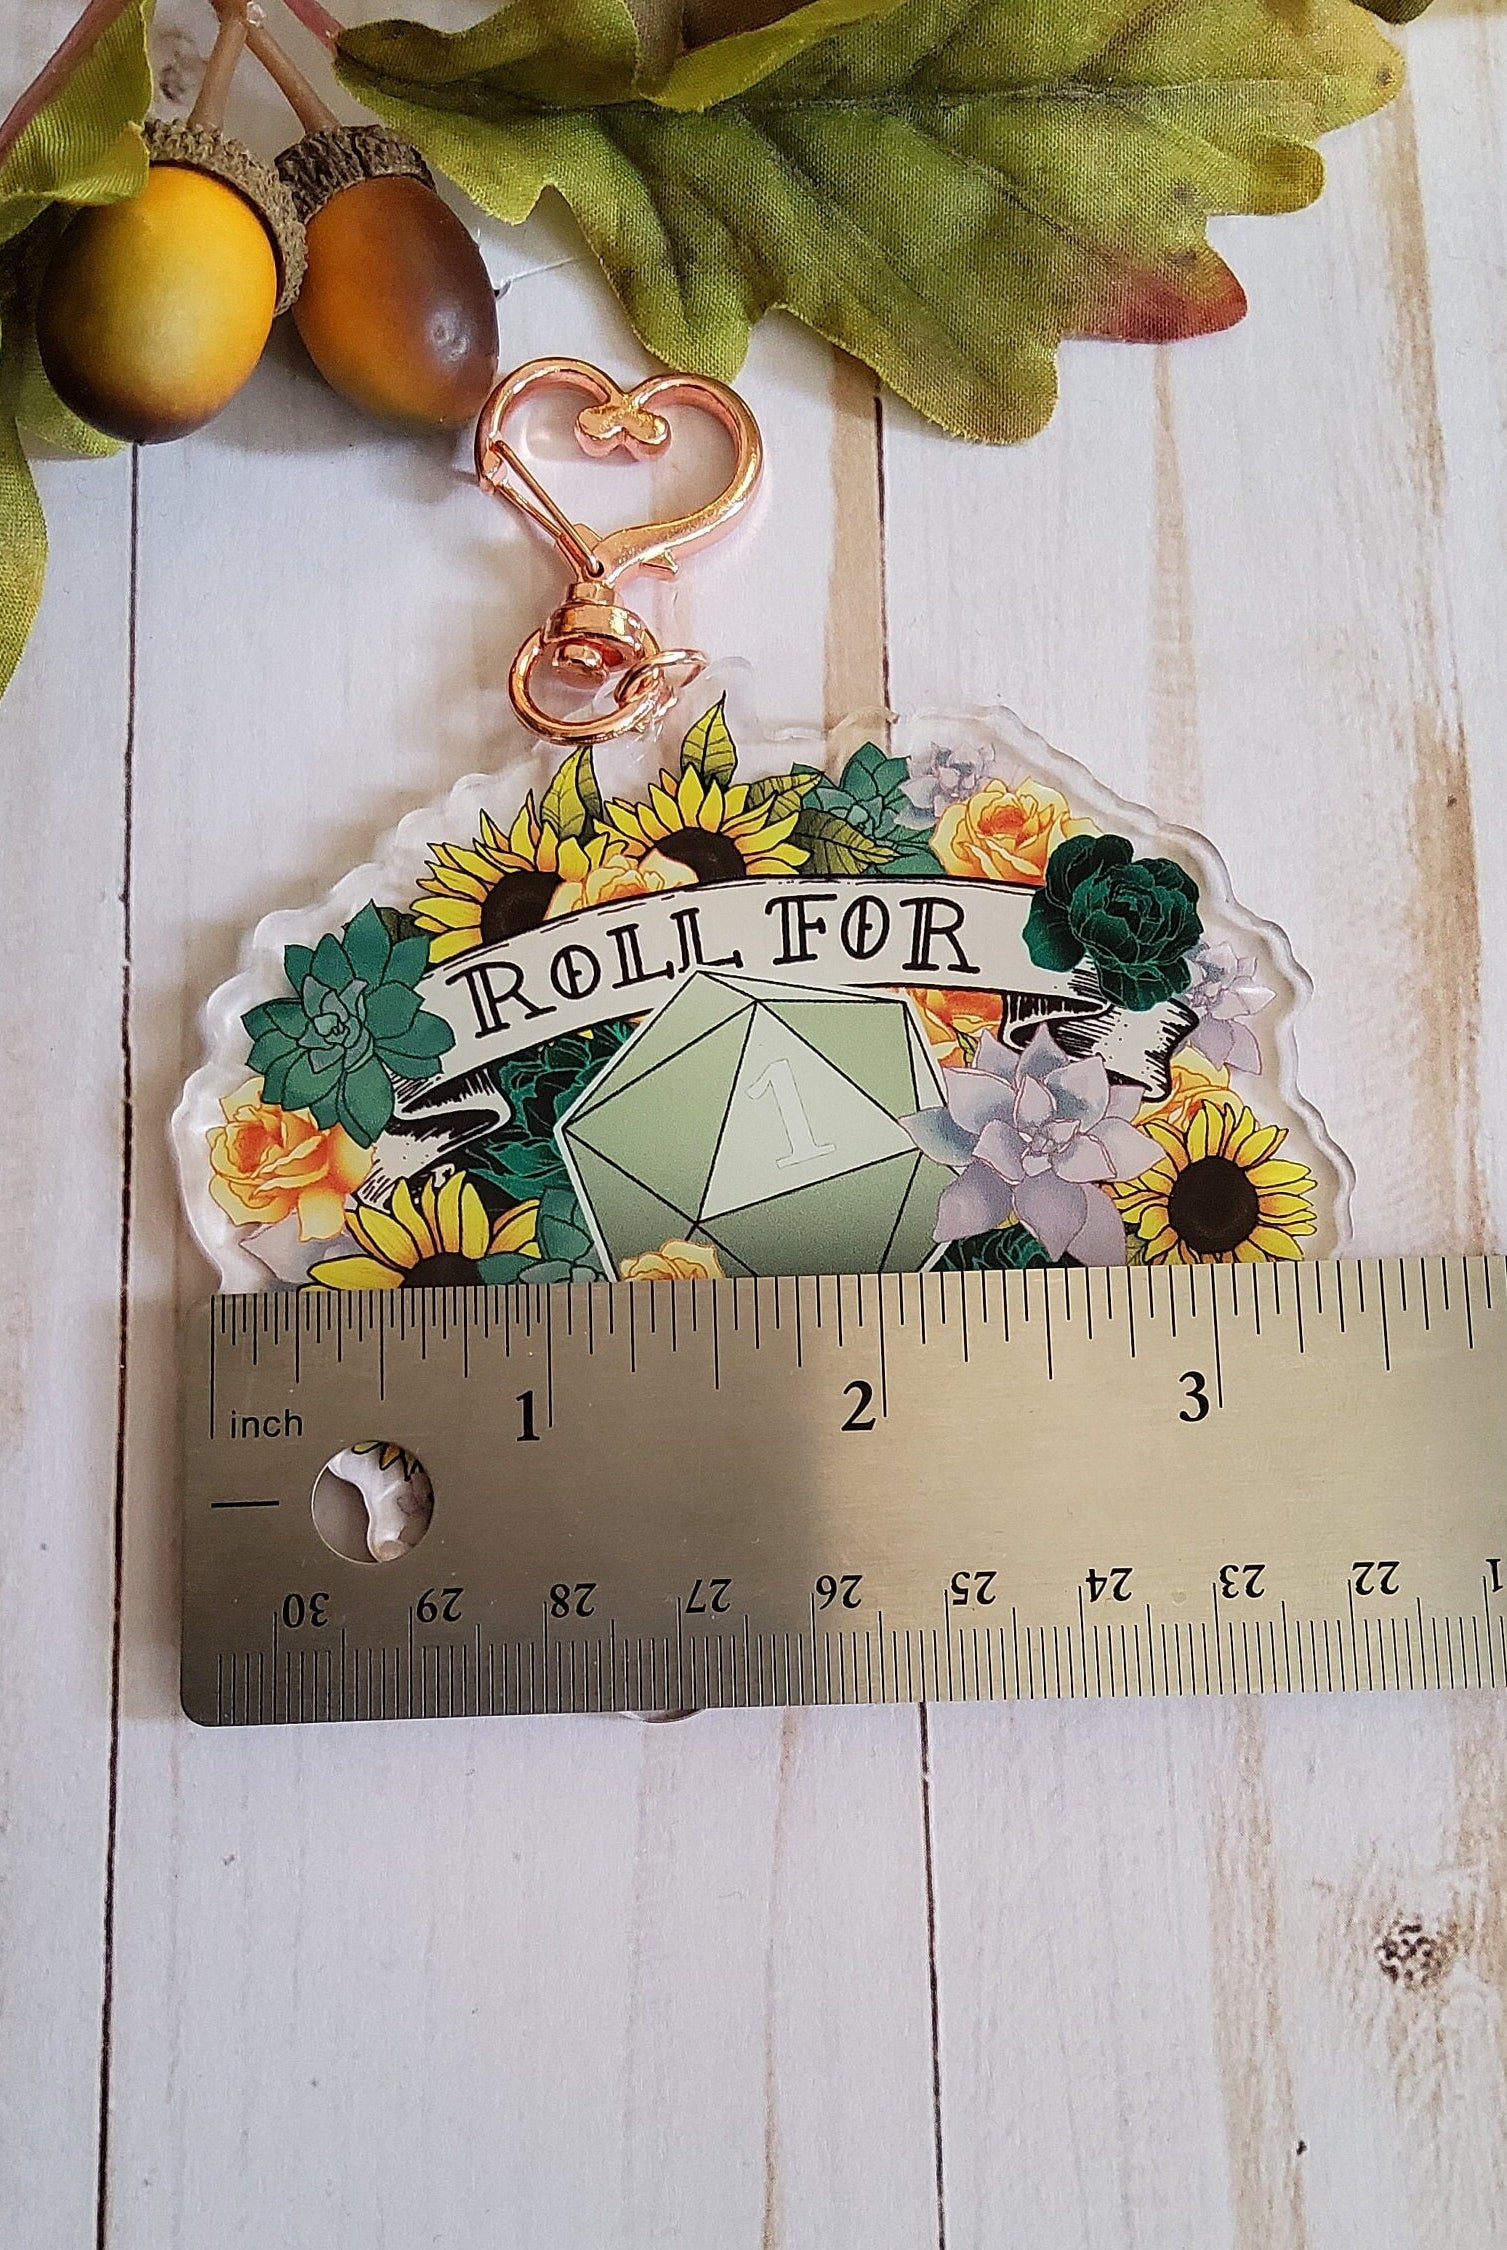 DOUBLE SIDED: Roll for Mental Health D20 Acrylic Charm , Roll for Mental Health Charm , Mental Health Charm , Mental Health Acrylic Charm